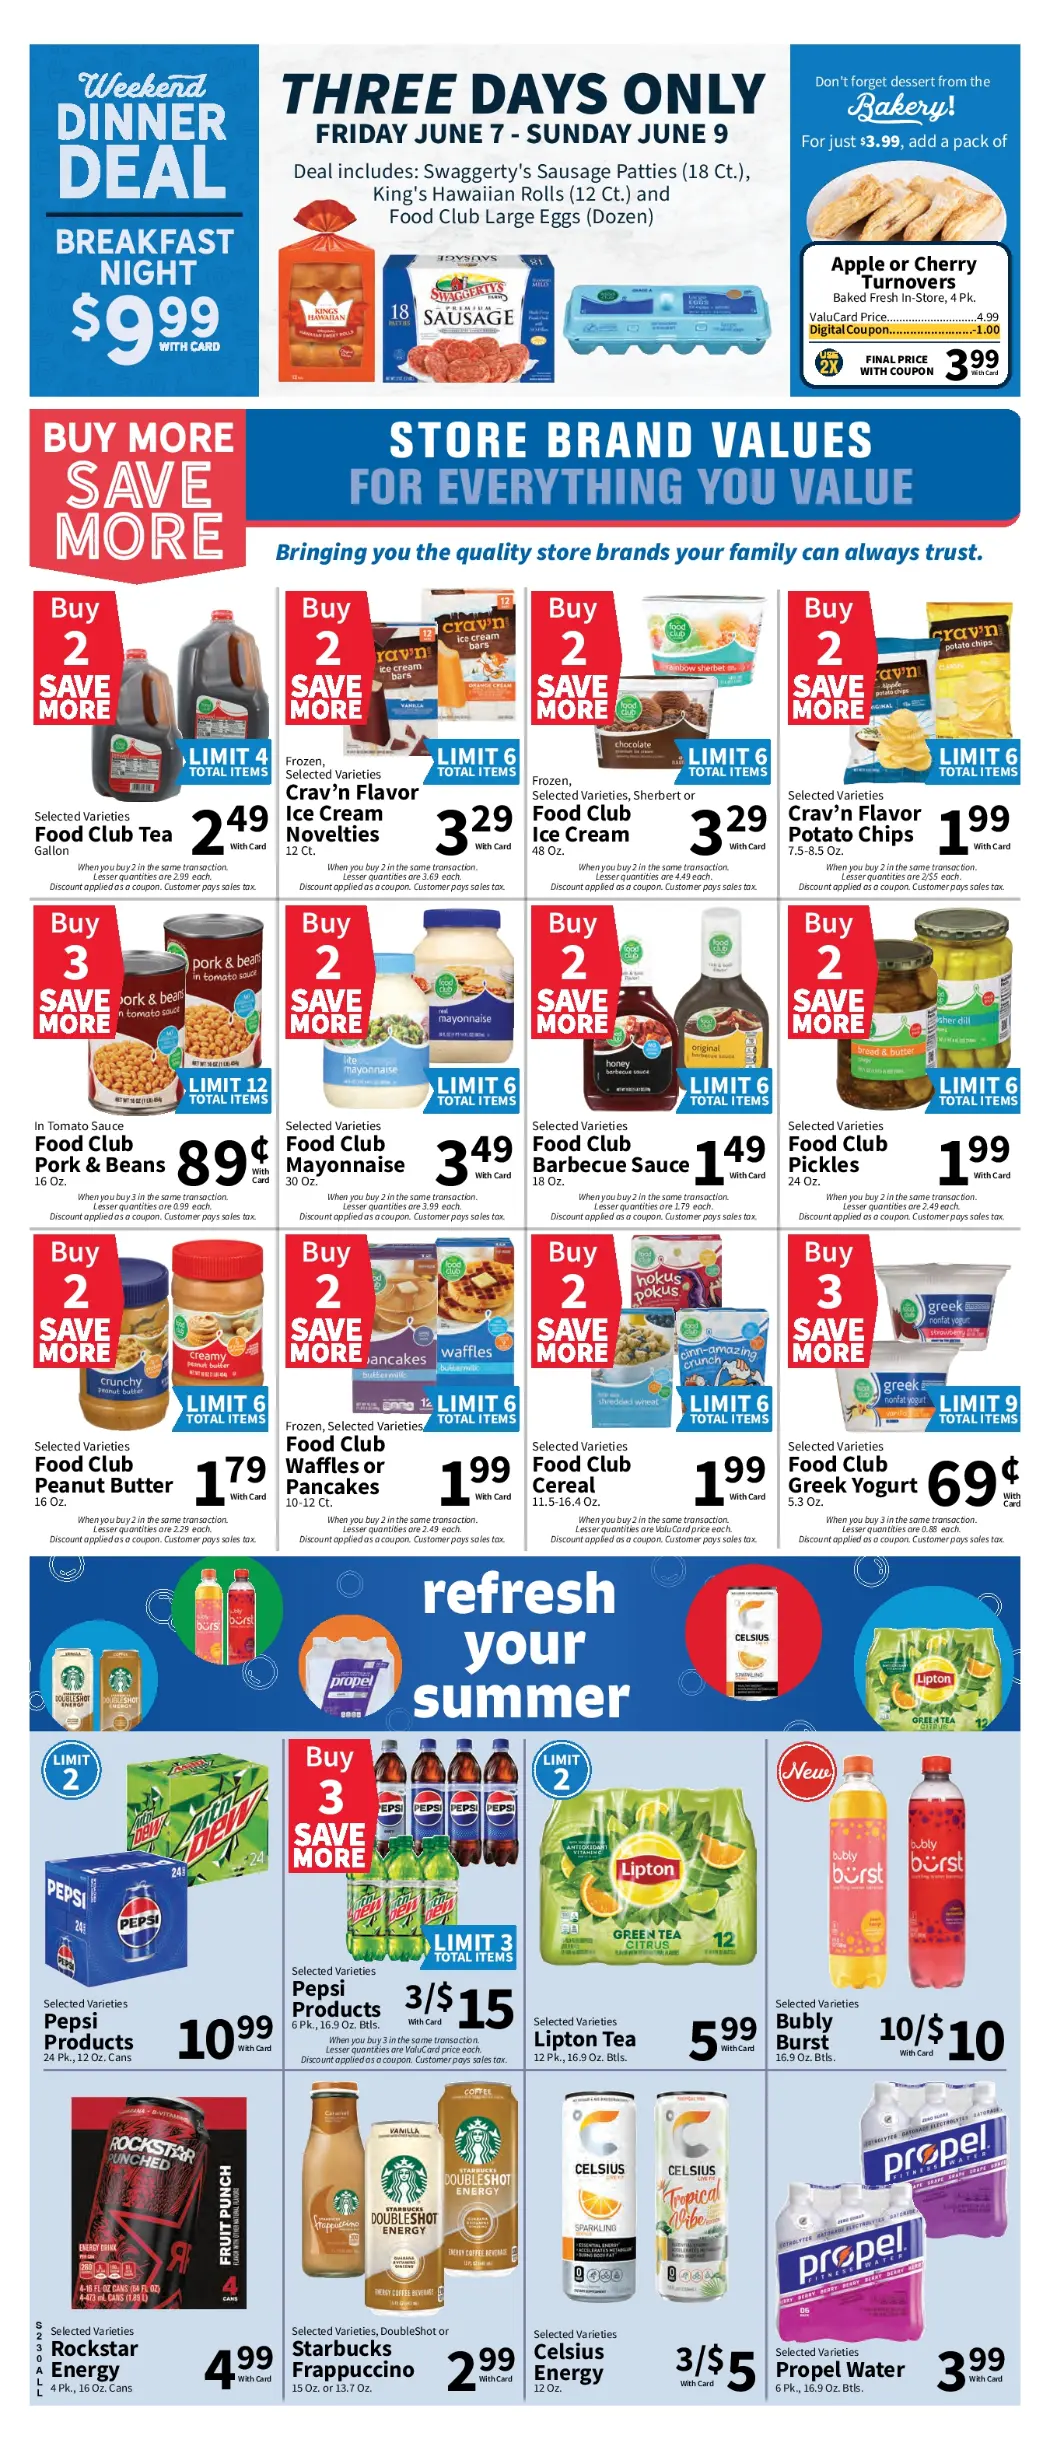 Food City July 2024 Weekly Sales, Deals, Discounts and Digital Coupons.